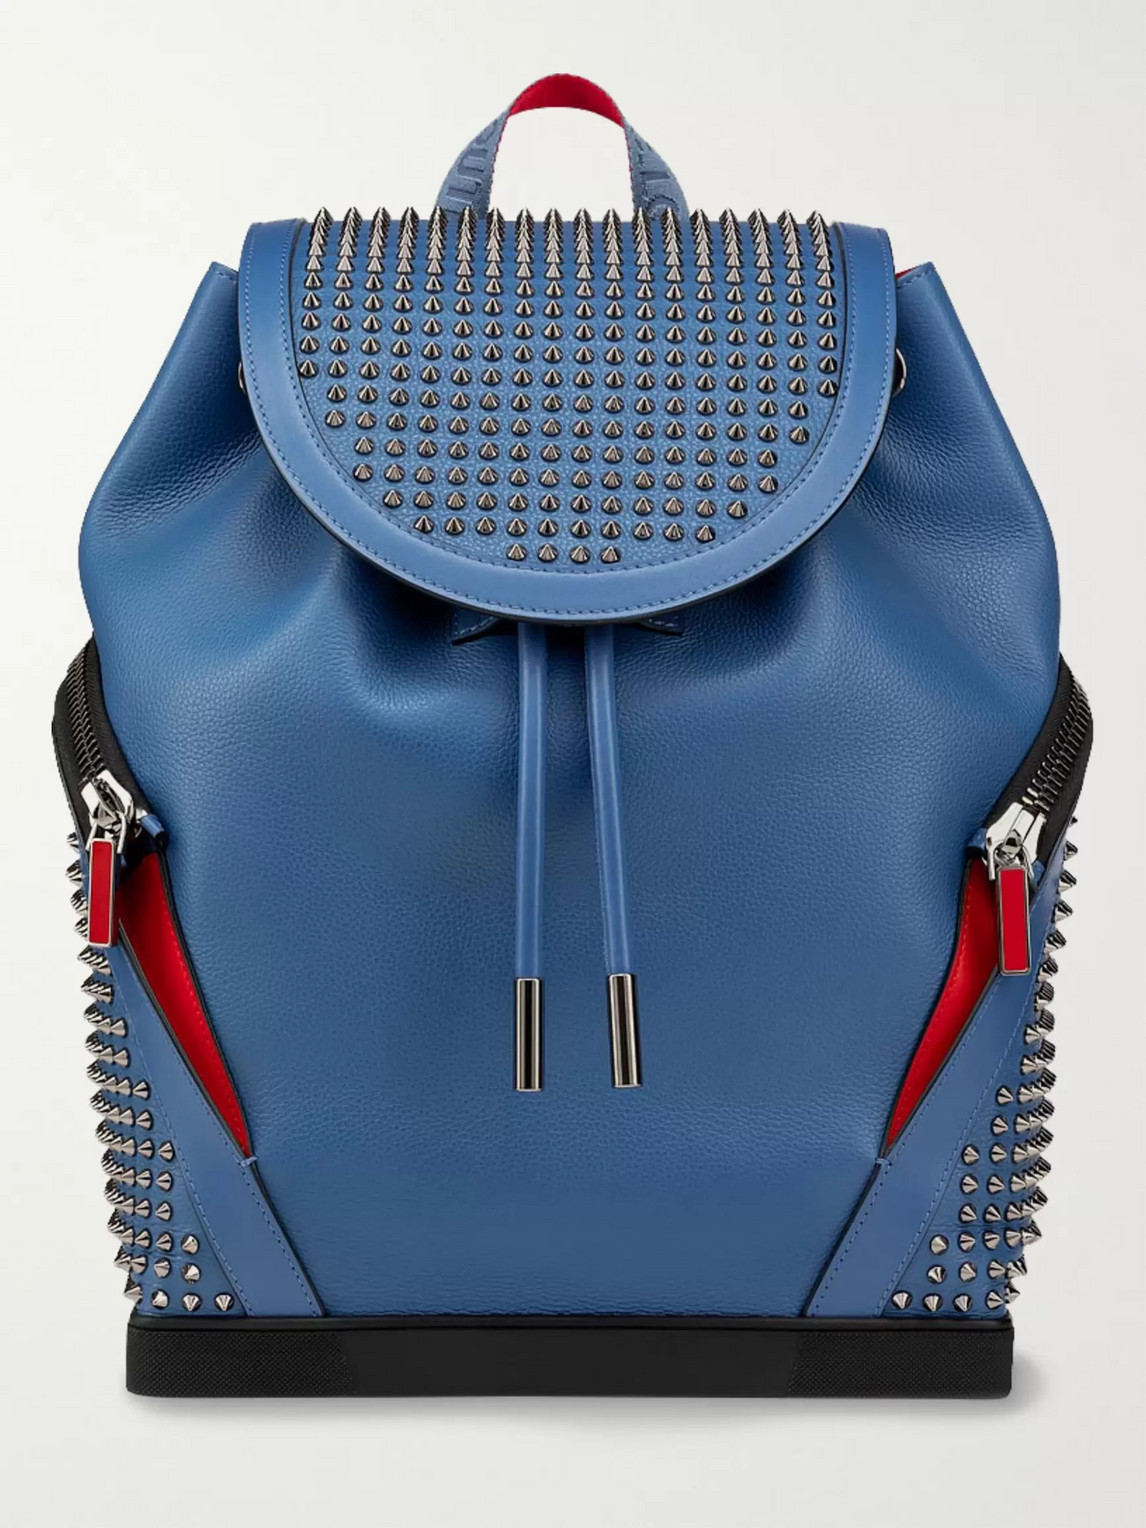 Christian Louboutin Explorafunk Spiked Full-grain Leather Backpack In Blue